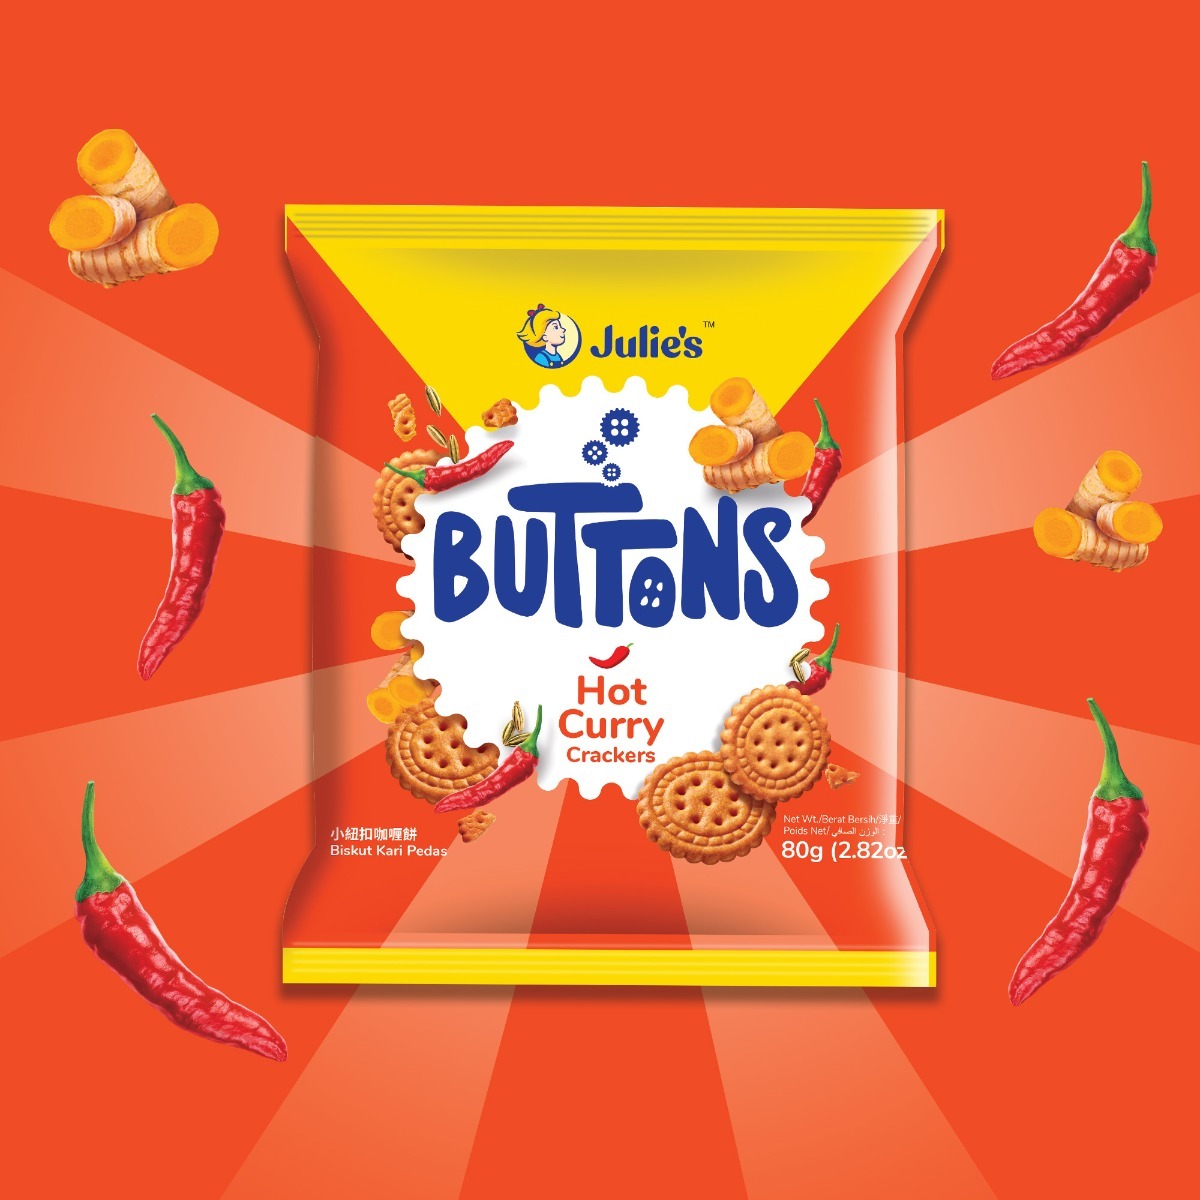 julie_s_buttons_hot_curry_crackers_80g_v2_1